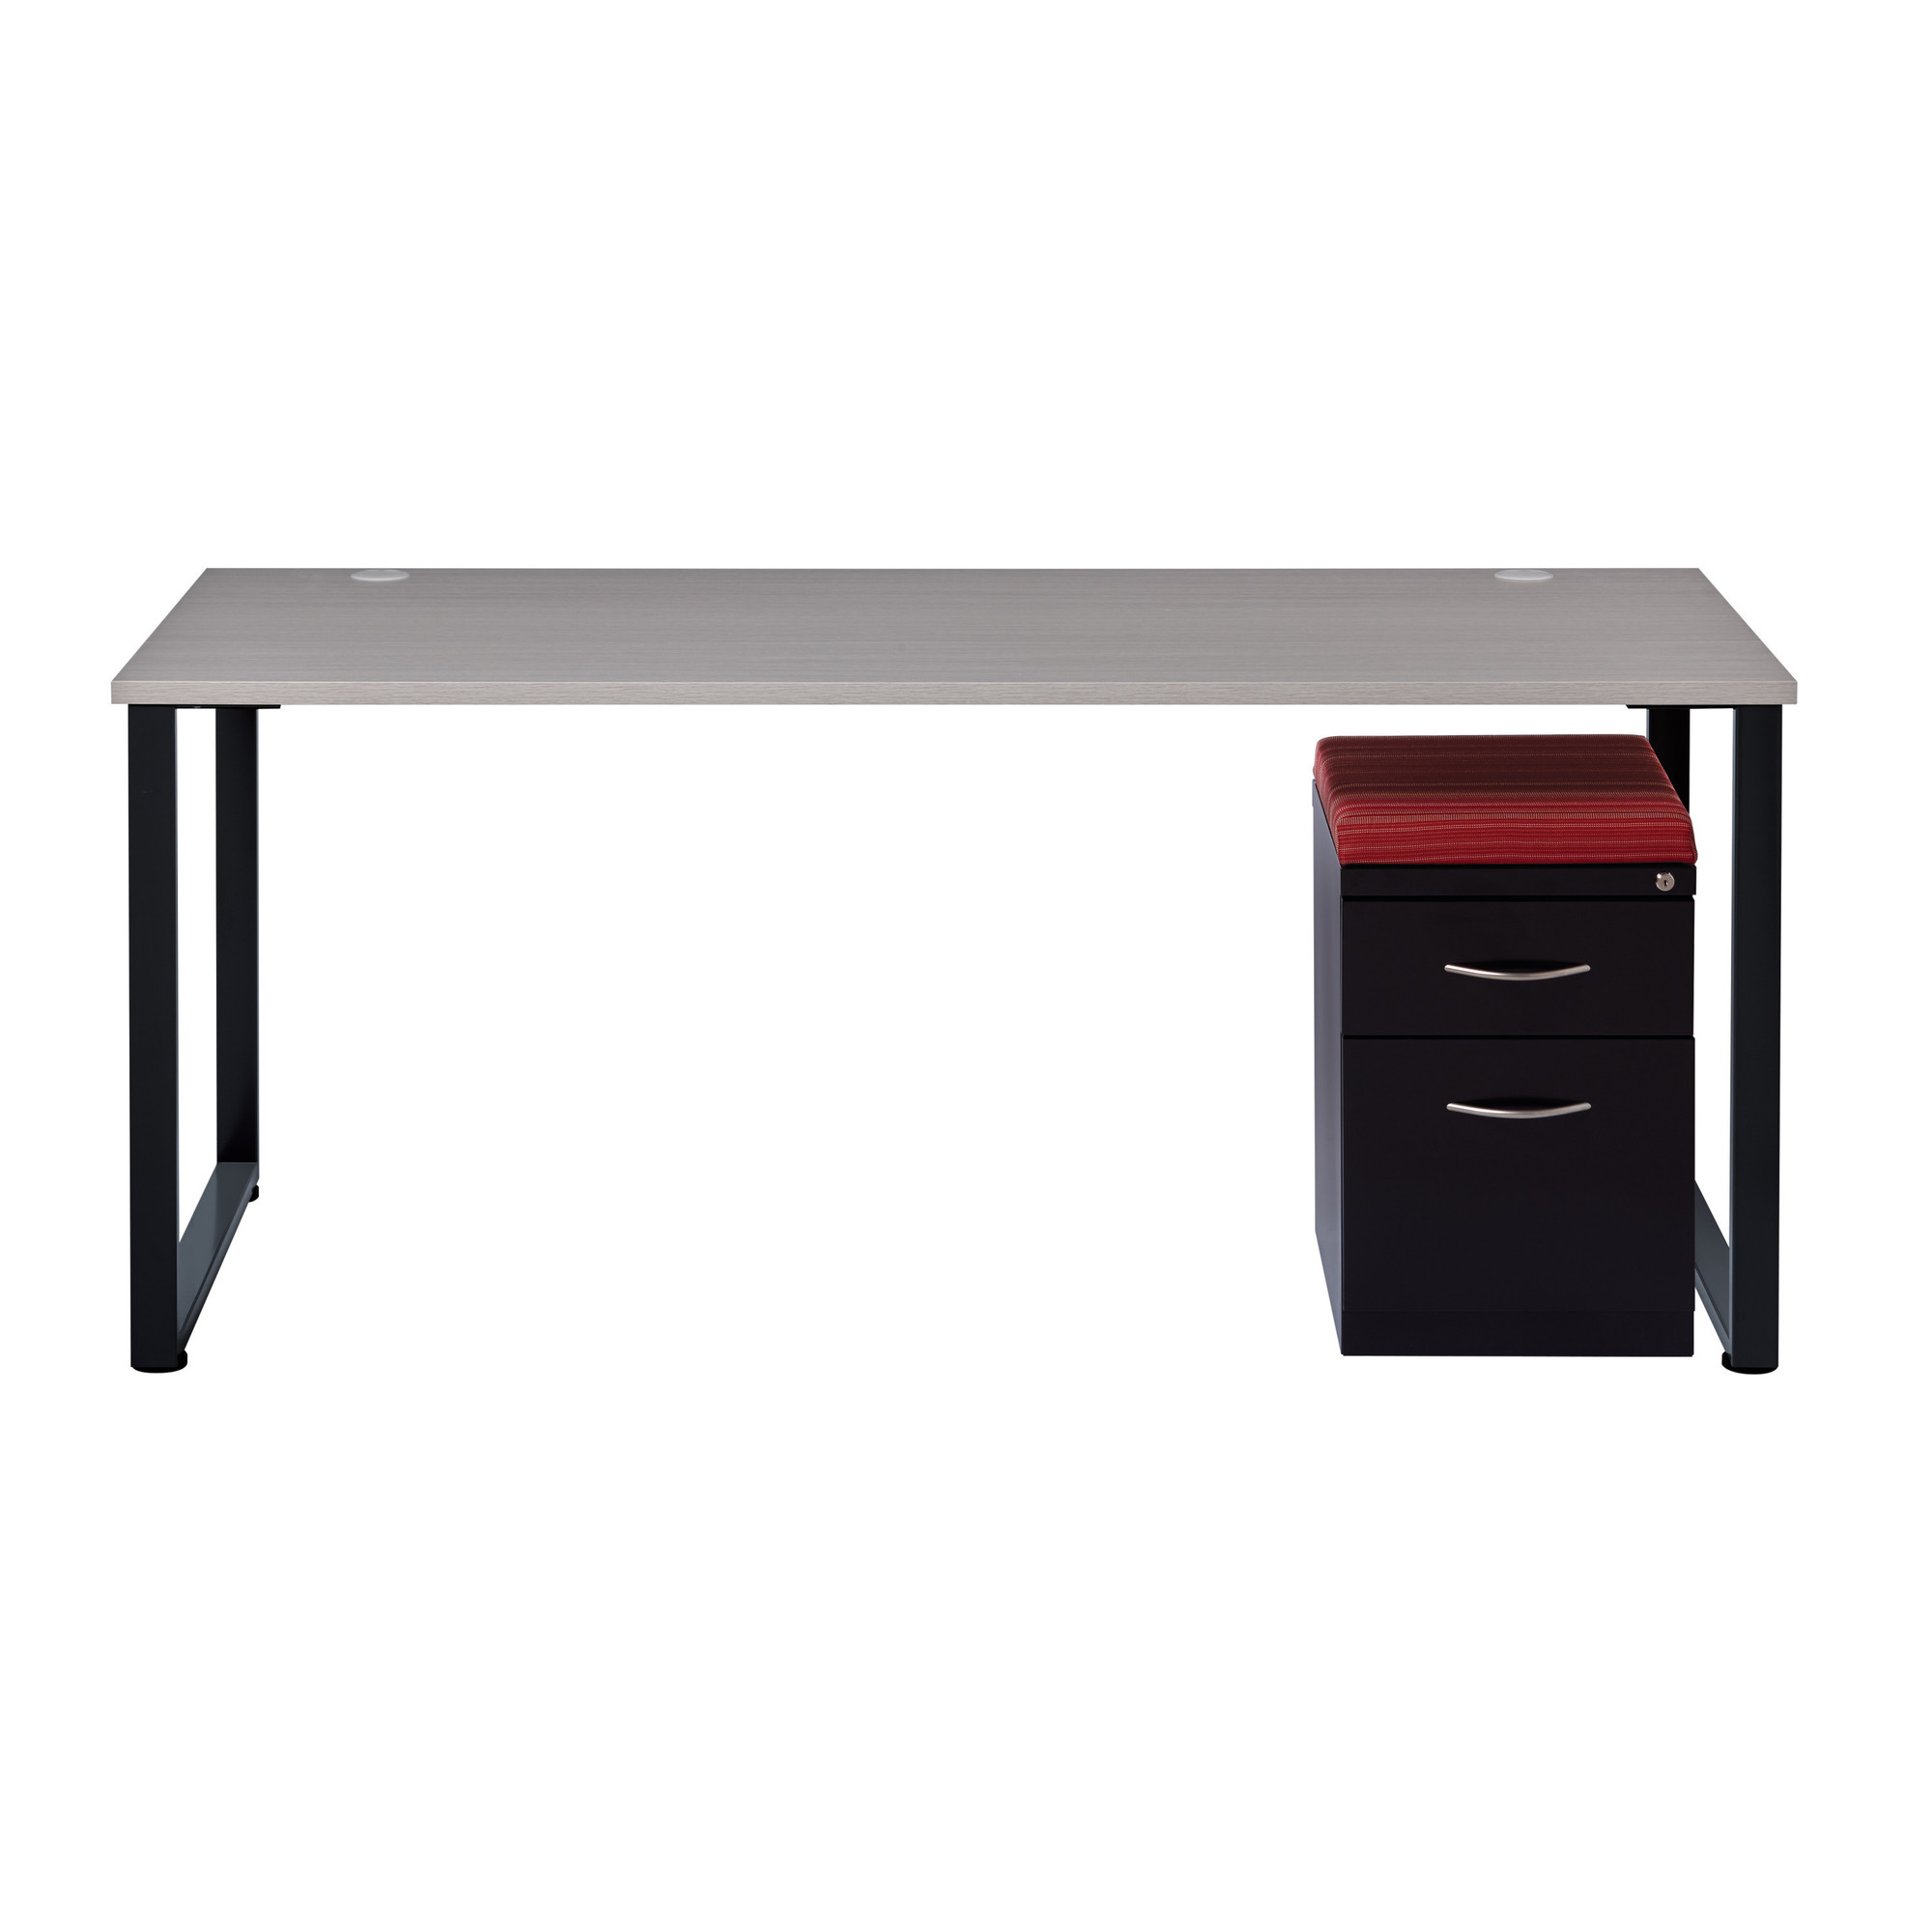 Hirsh Industries, Folding Home Office Desk for Home or Office, Width 43.375 in, Height 29.75 in, Depth 21.625 in, Model 24969